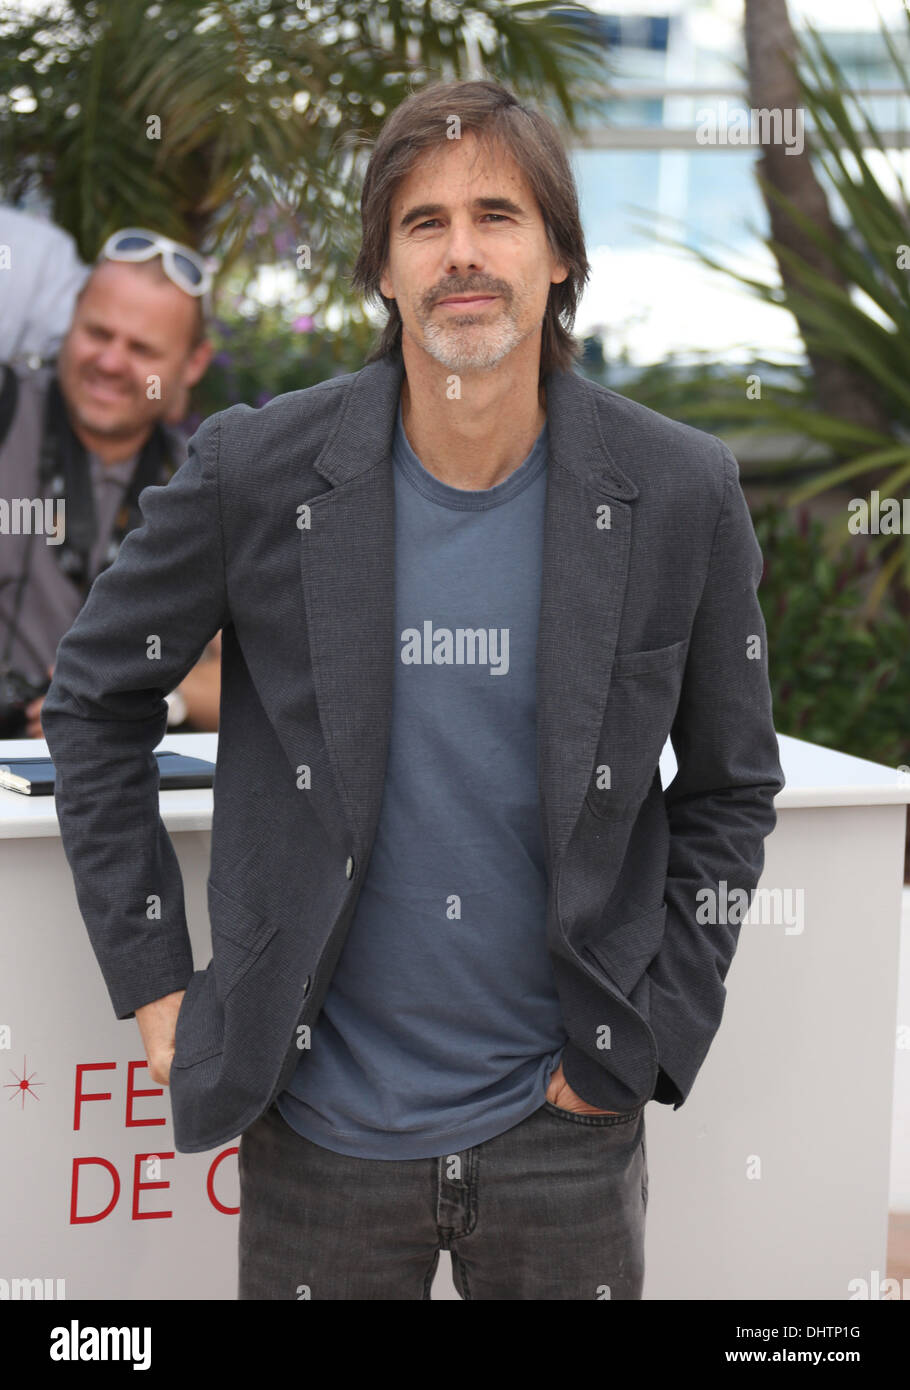 Walter Salles 'On the Road' photocall during the 65th Cannes Film Festival Cannes, France - 23.05.12 Stock Photo